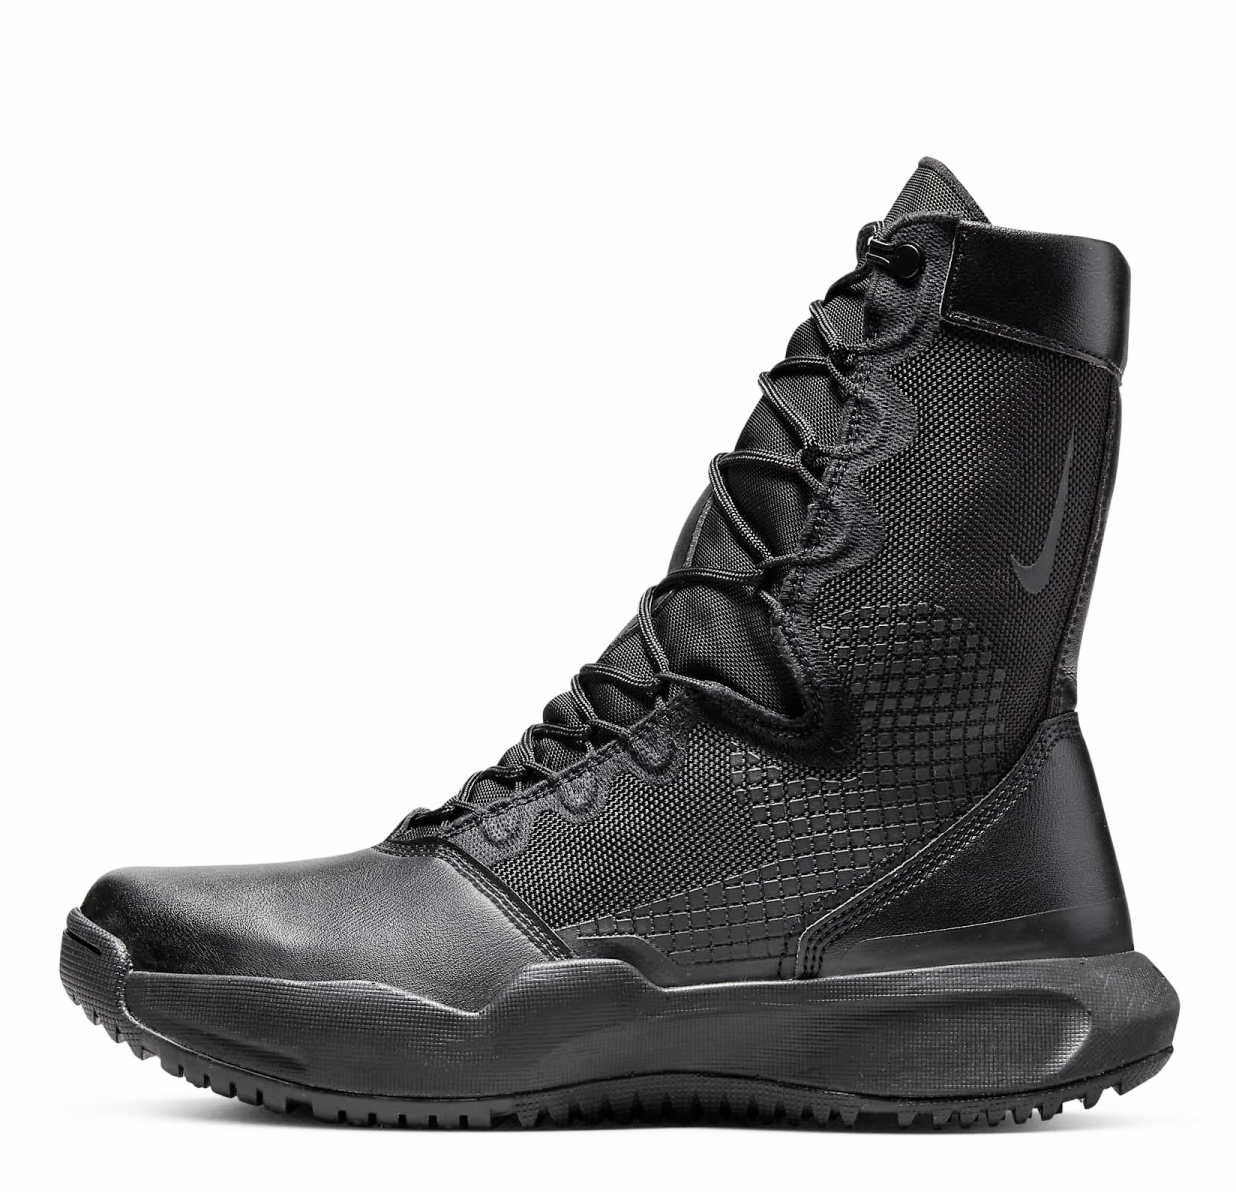 Nike SFB B1 Black Leather Tactical Boots